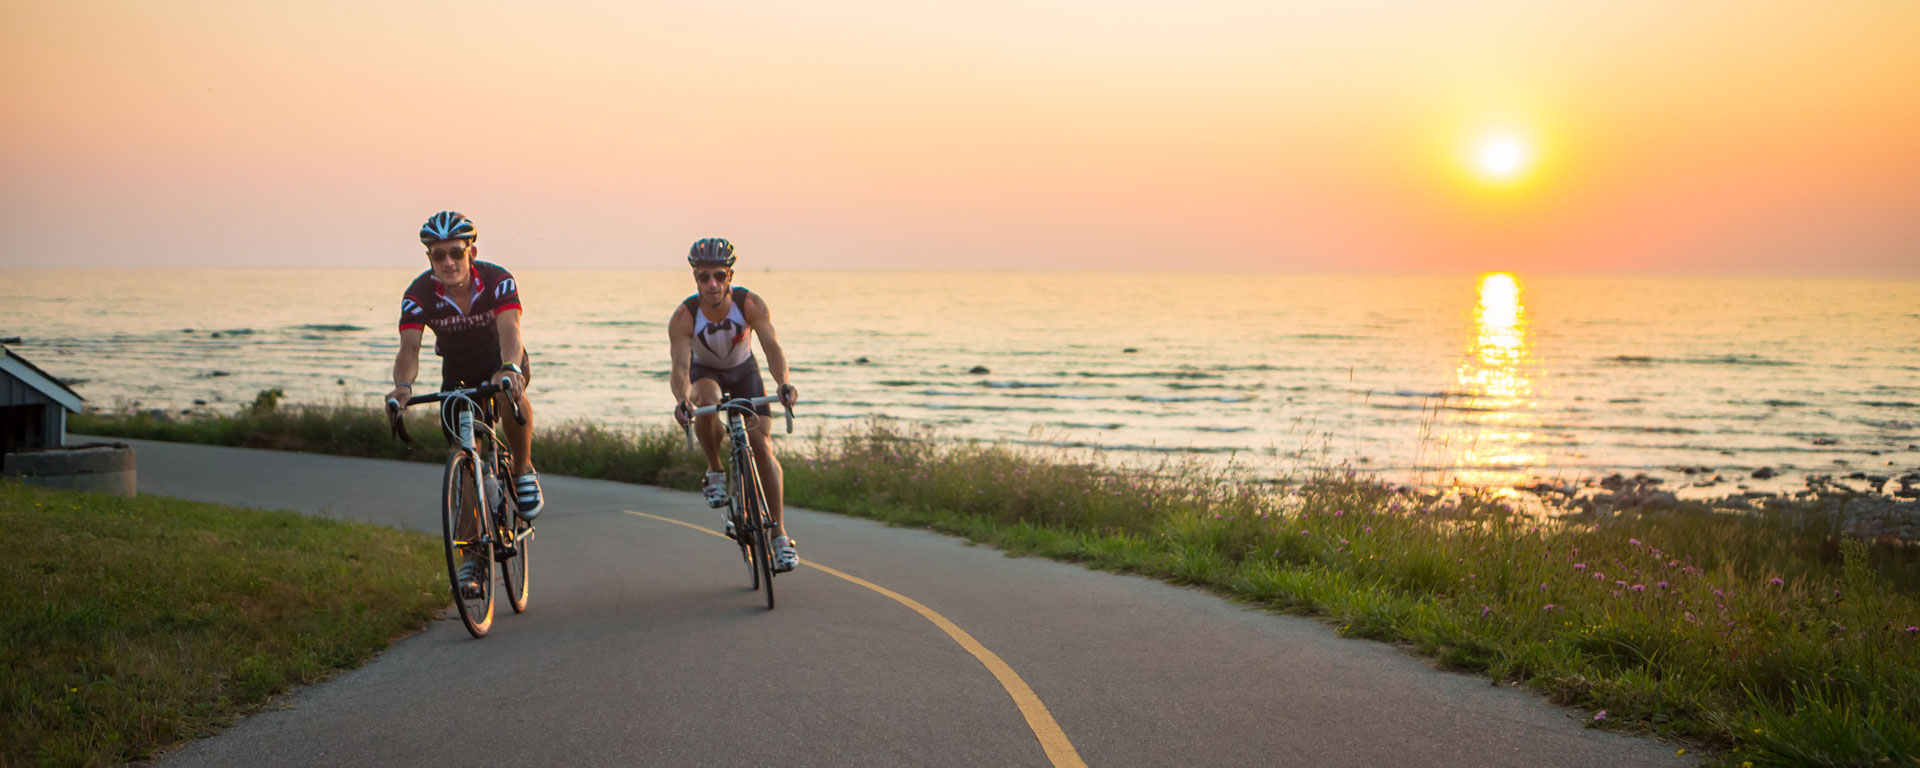 two cyclists on the empty road with a golden sunset in the background